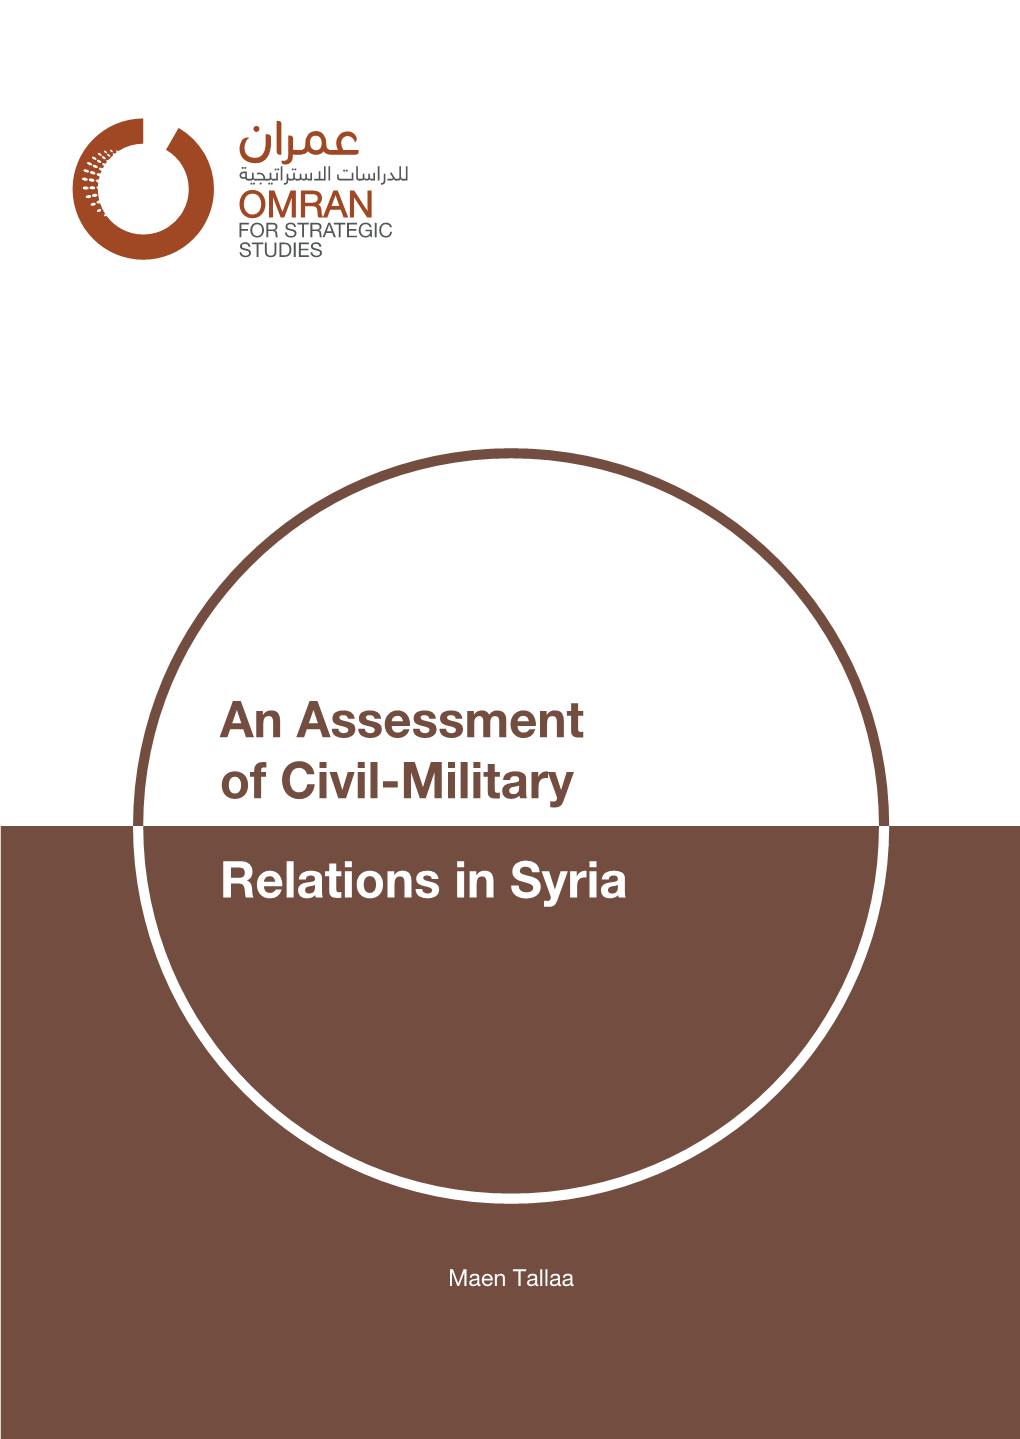 An Assessment of Civil-Military Relations in Syria